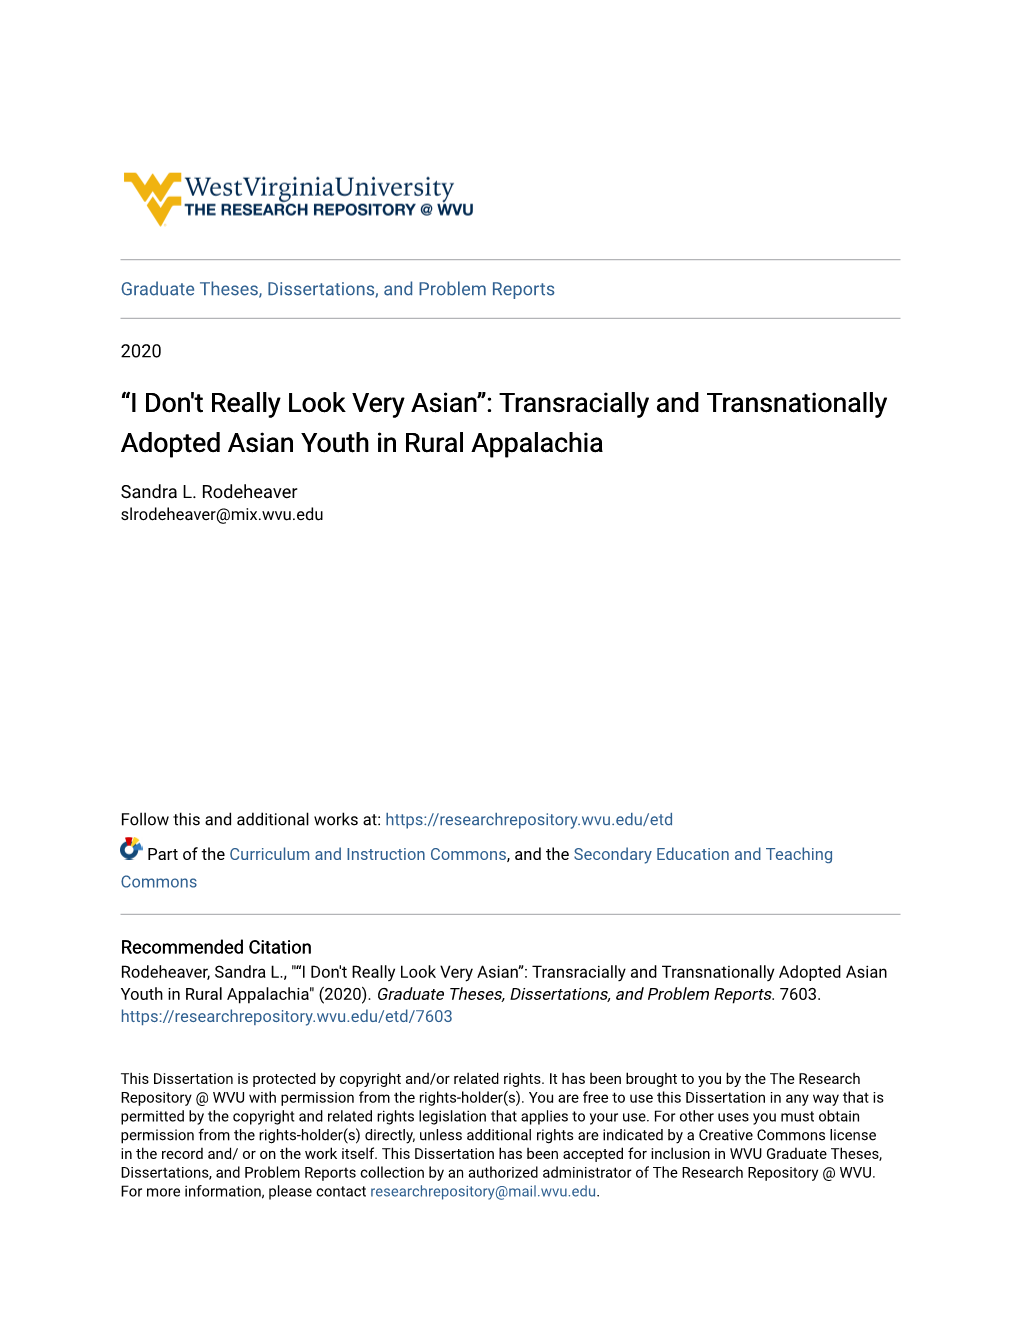 Transracially and Transnationally Adopted Asian Youth in Rural Appalachia